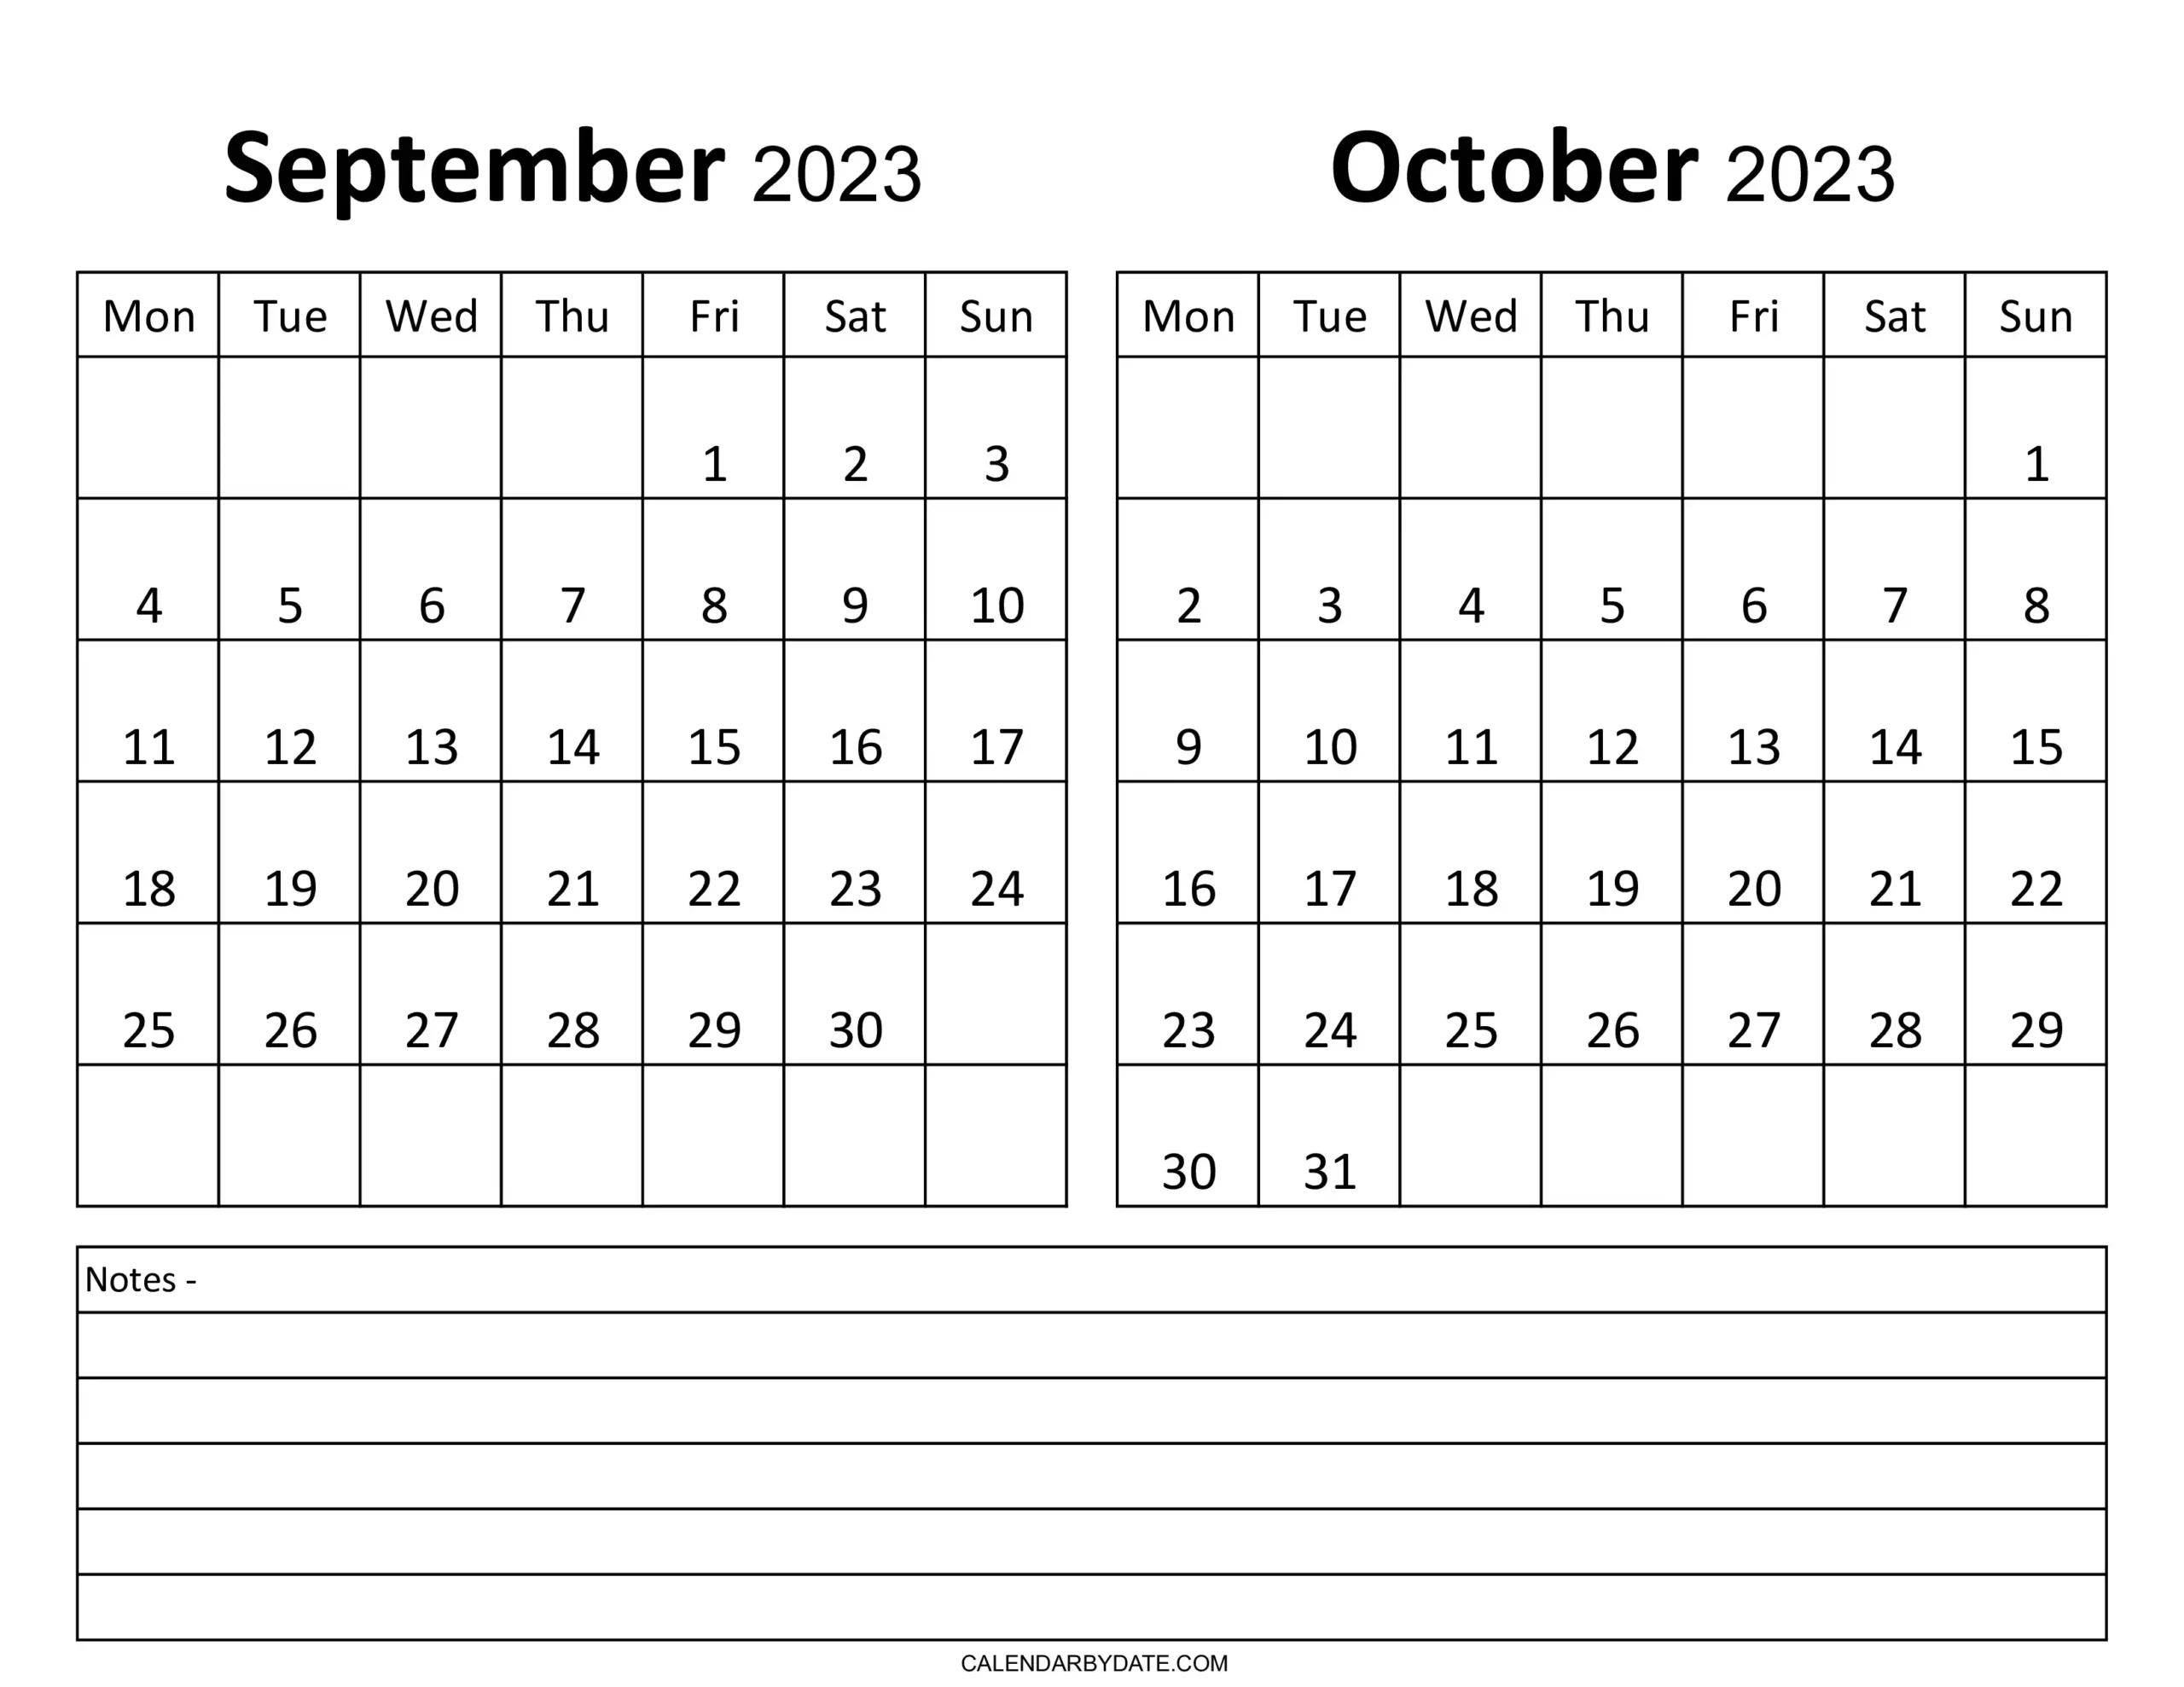 The September October 2023 Calendar with Notes is a helpful tool to keep you organized. It provides section for you to write down important things you need to remember.